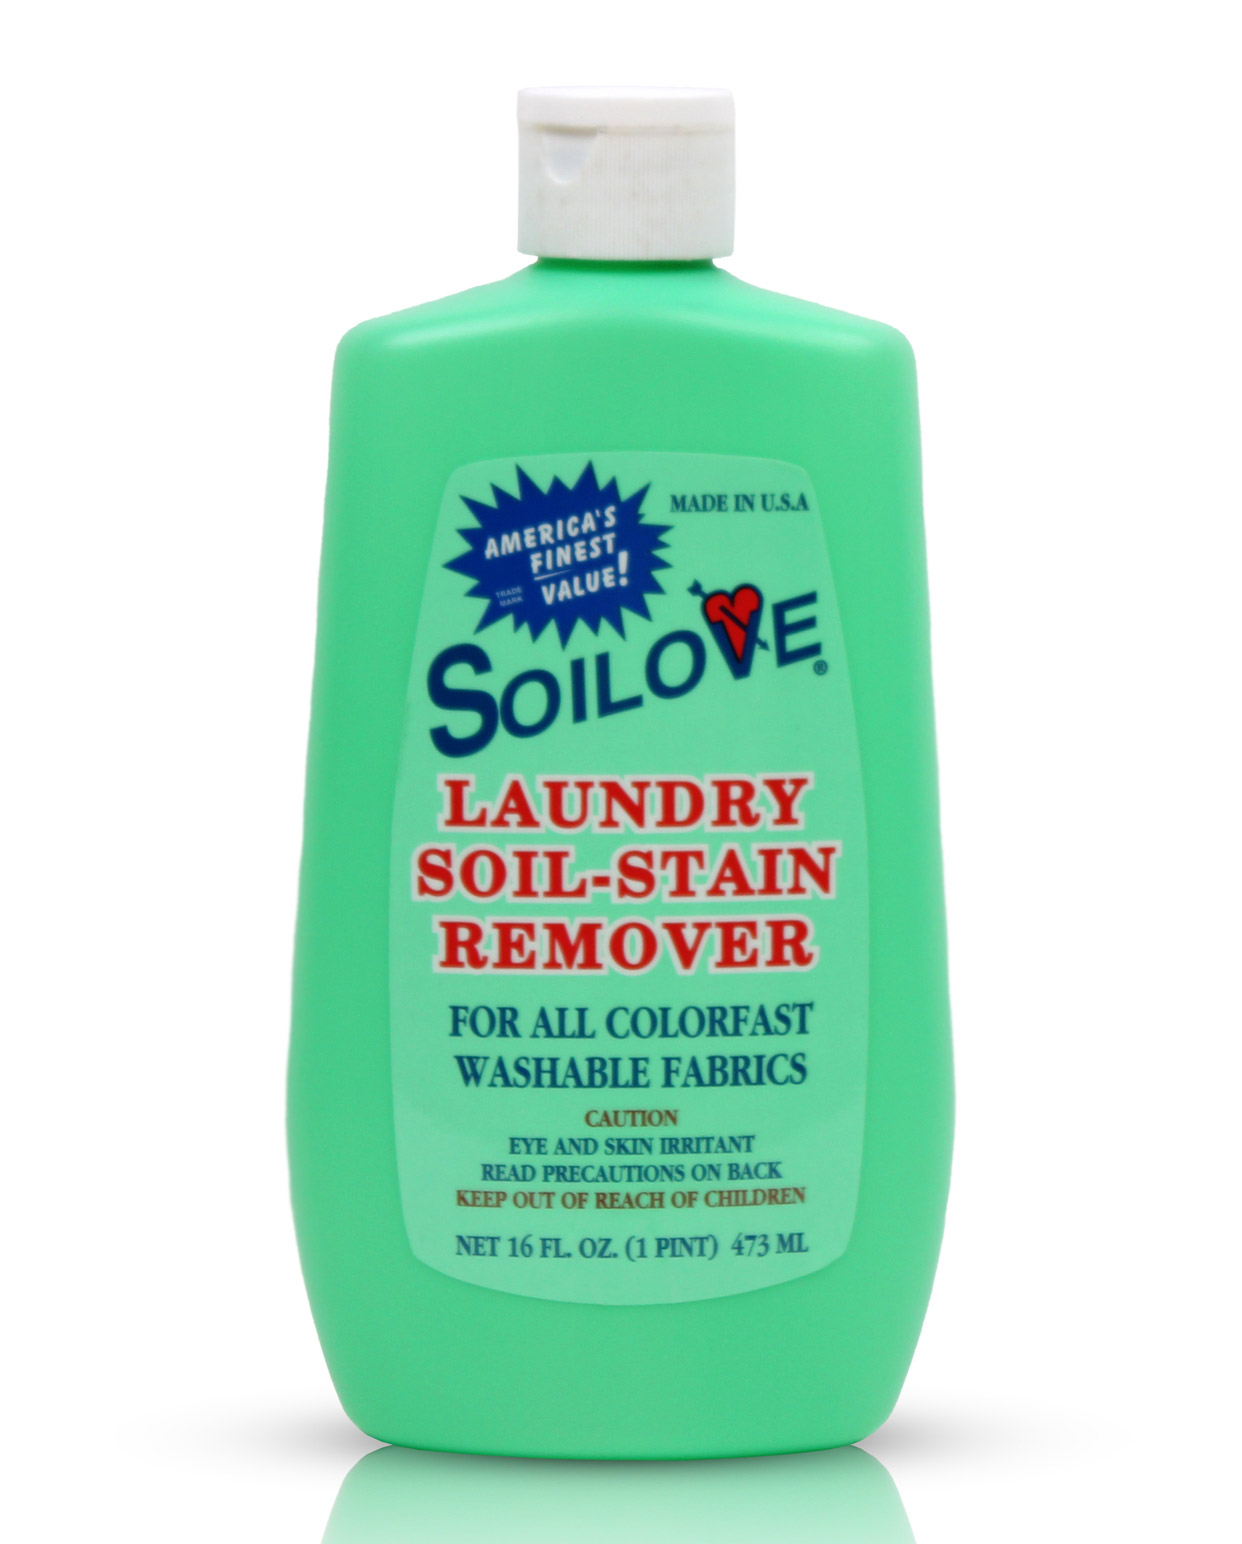 16oz bottle of Effective Laundry Stain Remover with a clear label displaying the brand name.